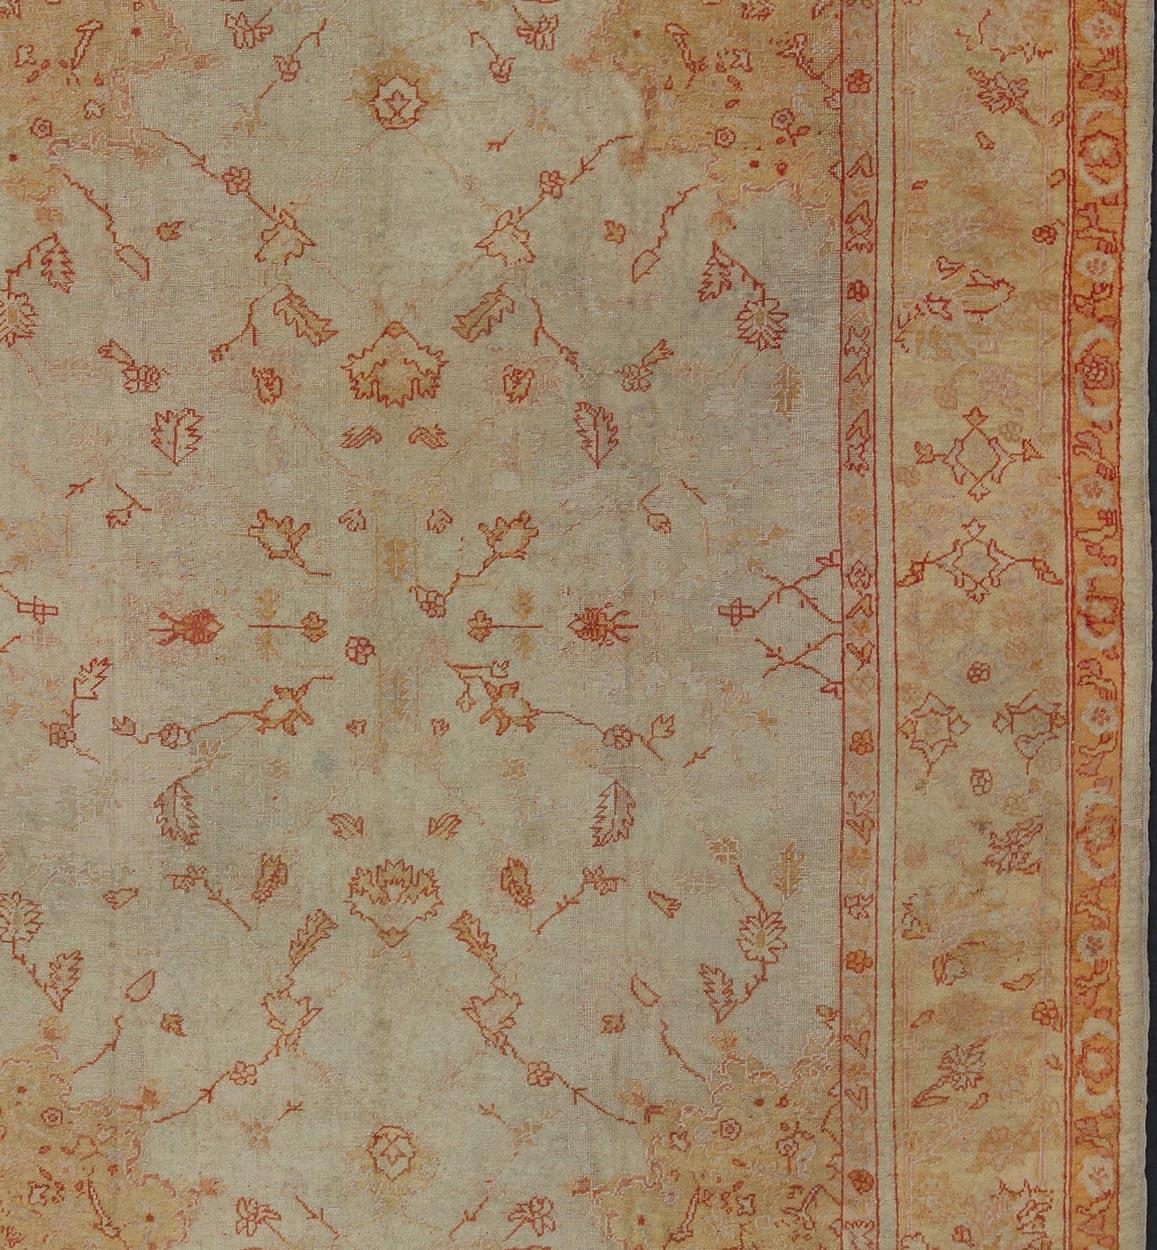 Antique Turkish Oushak Carpet In Red, Cream, and Yellow with A Muted Design  In Good Condition For Sale In Atlanta, GA